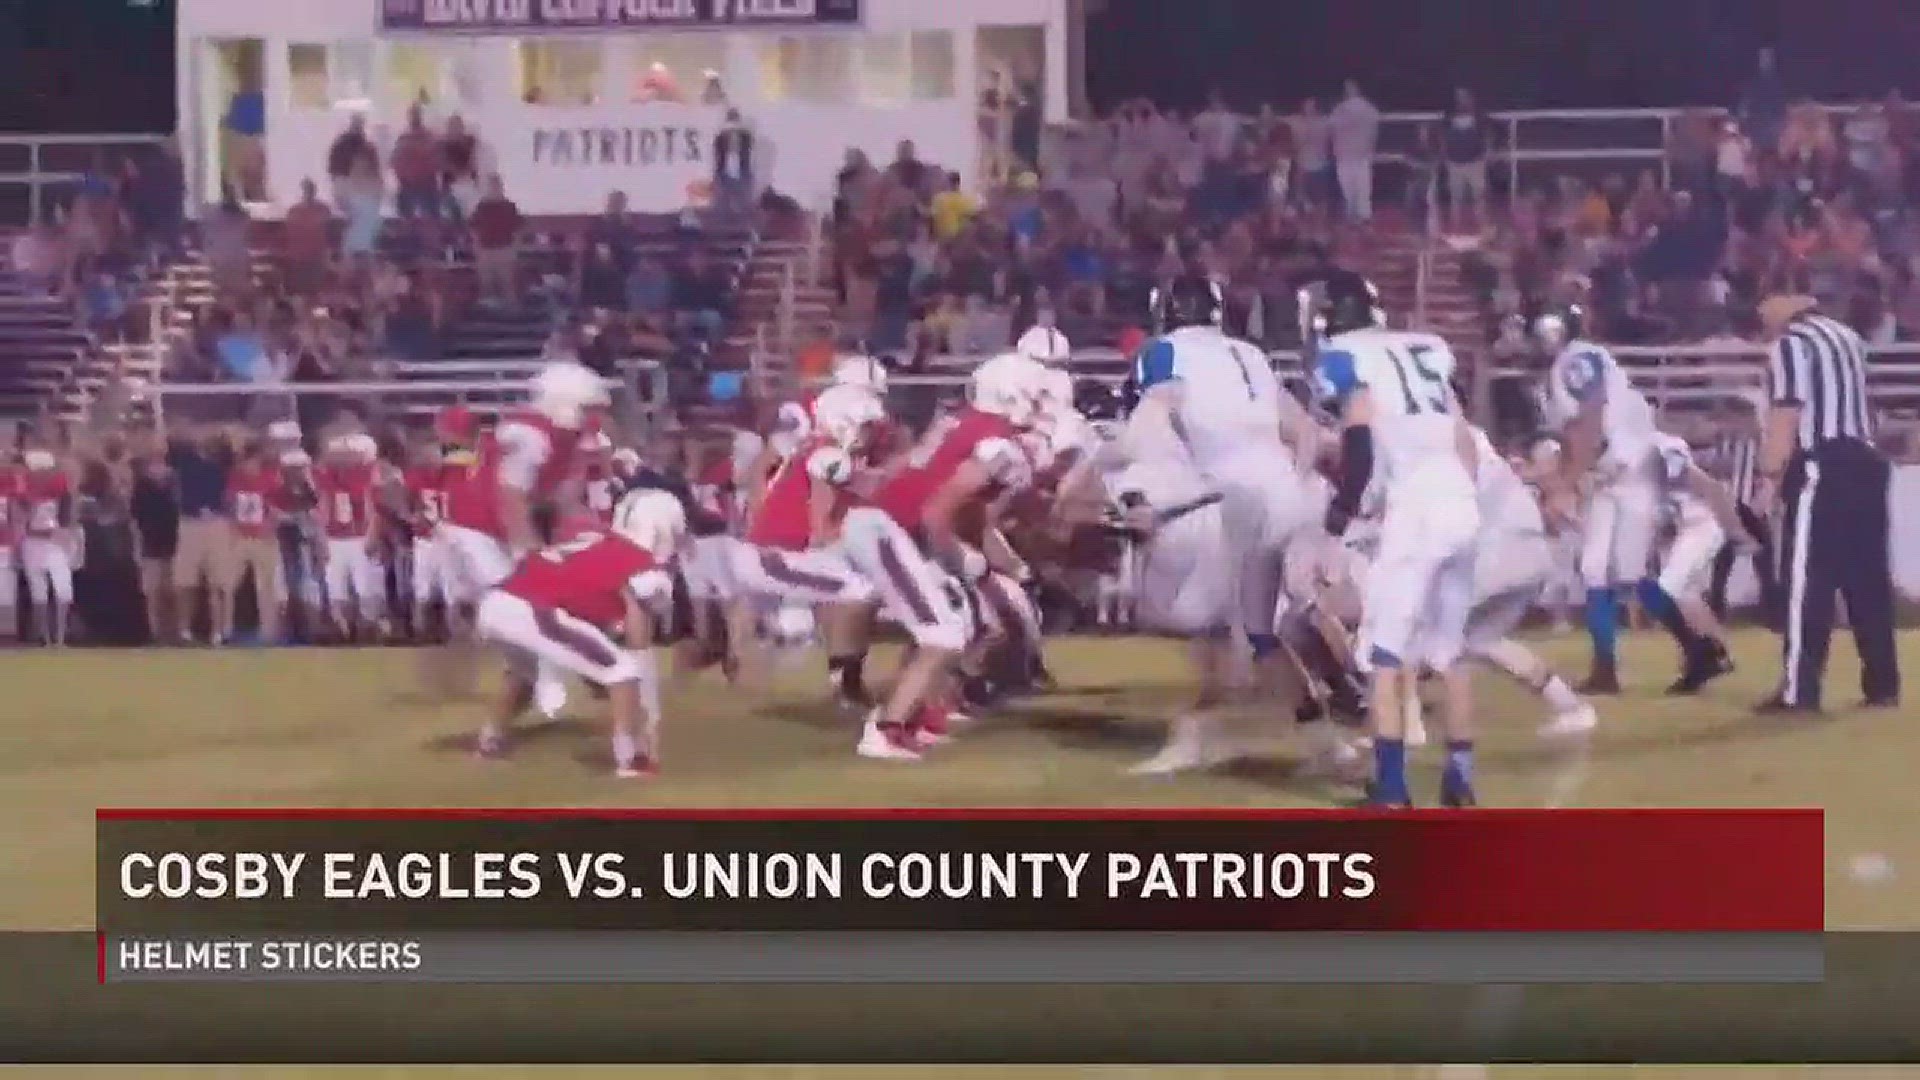 Union County ends its 28-game losing streak with a 6-0 win over Cosby. It's the first shutout for the Patriots since November 2, 2007.